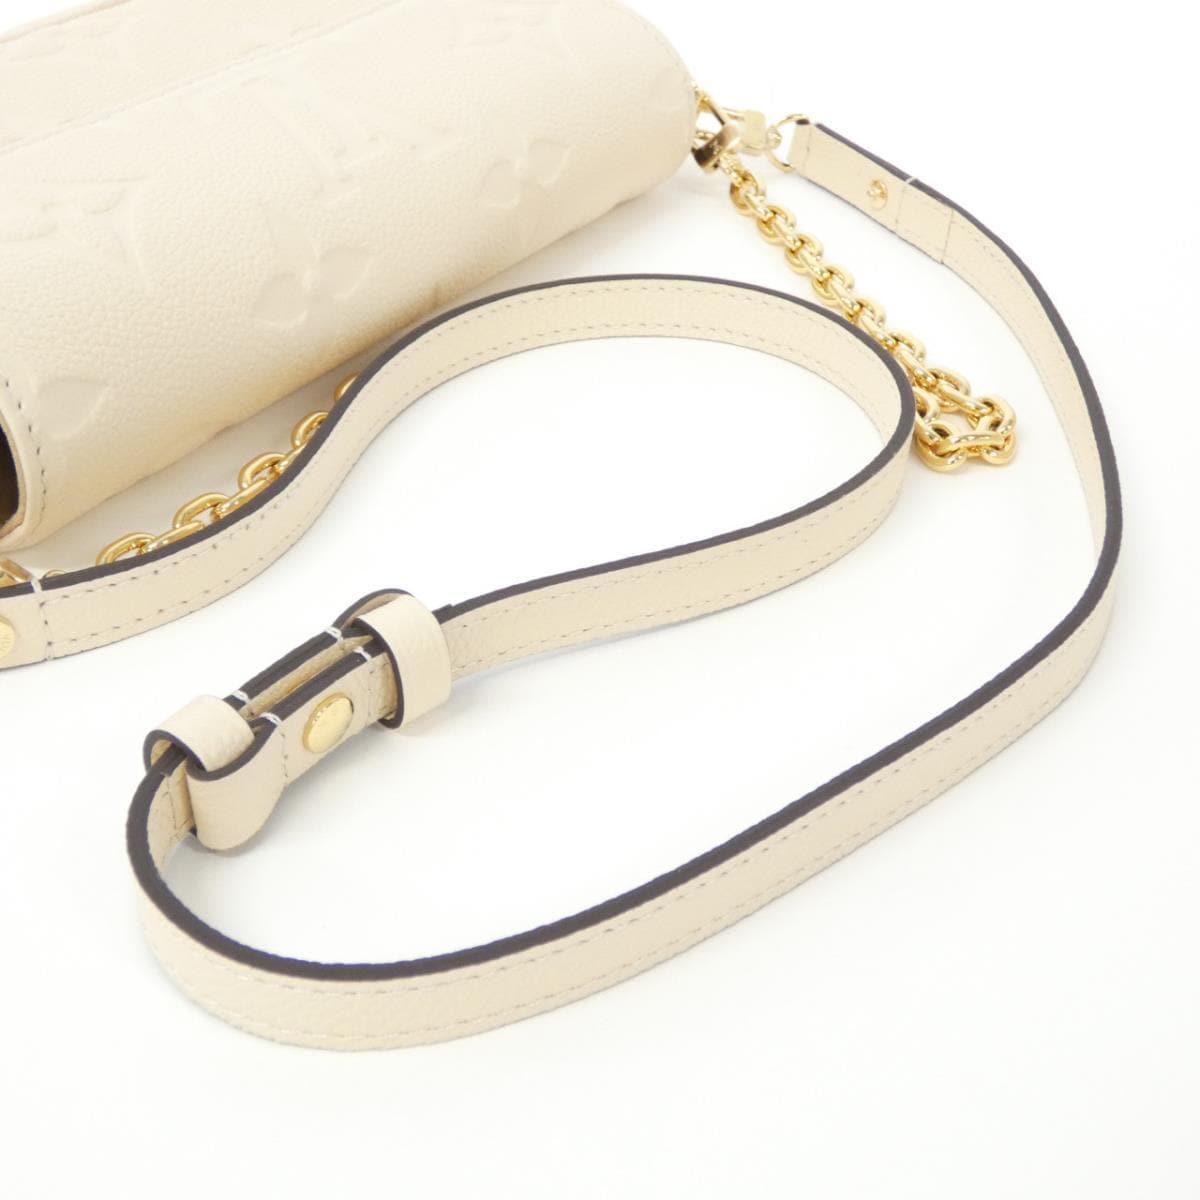 Wallet On Chain Ivy Monogram Empreinte Leather - Wallets and Small Leather  Goods